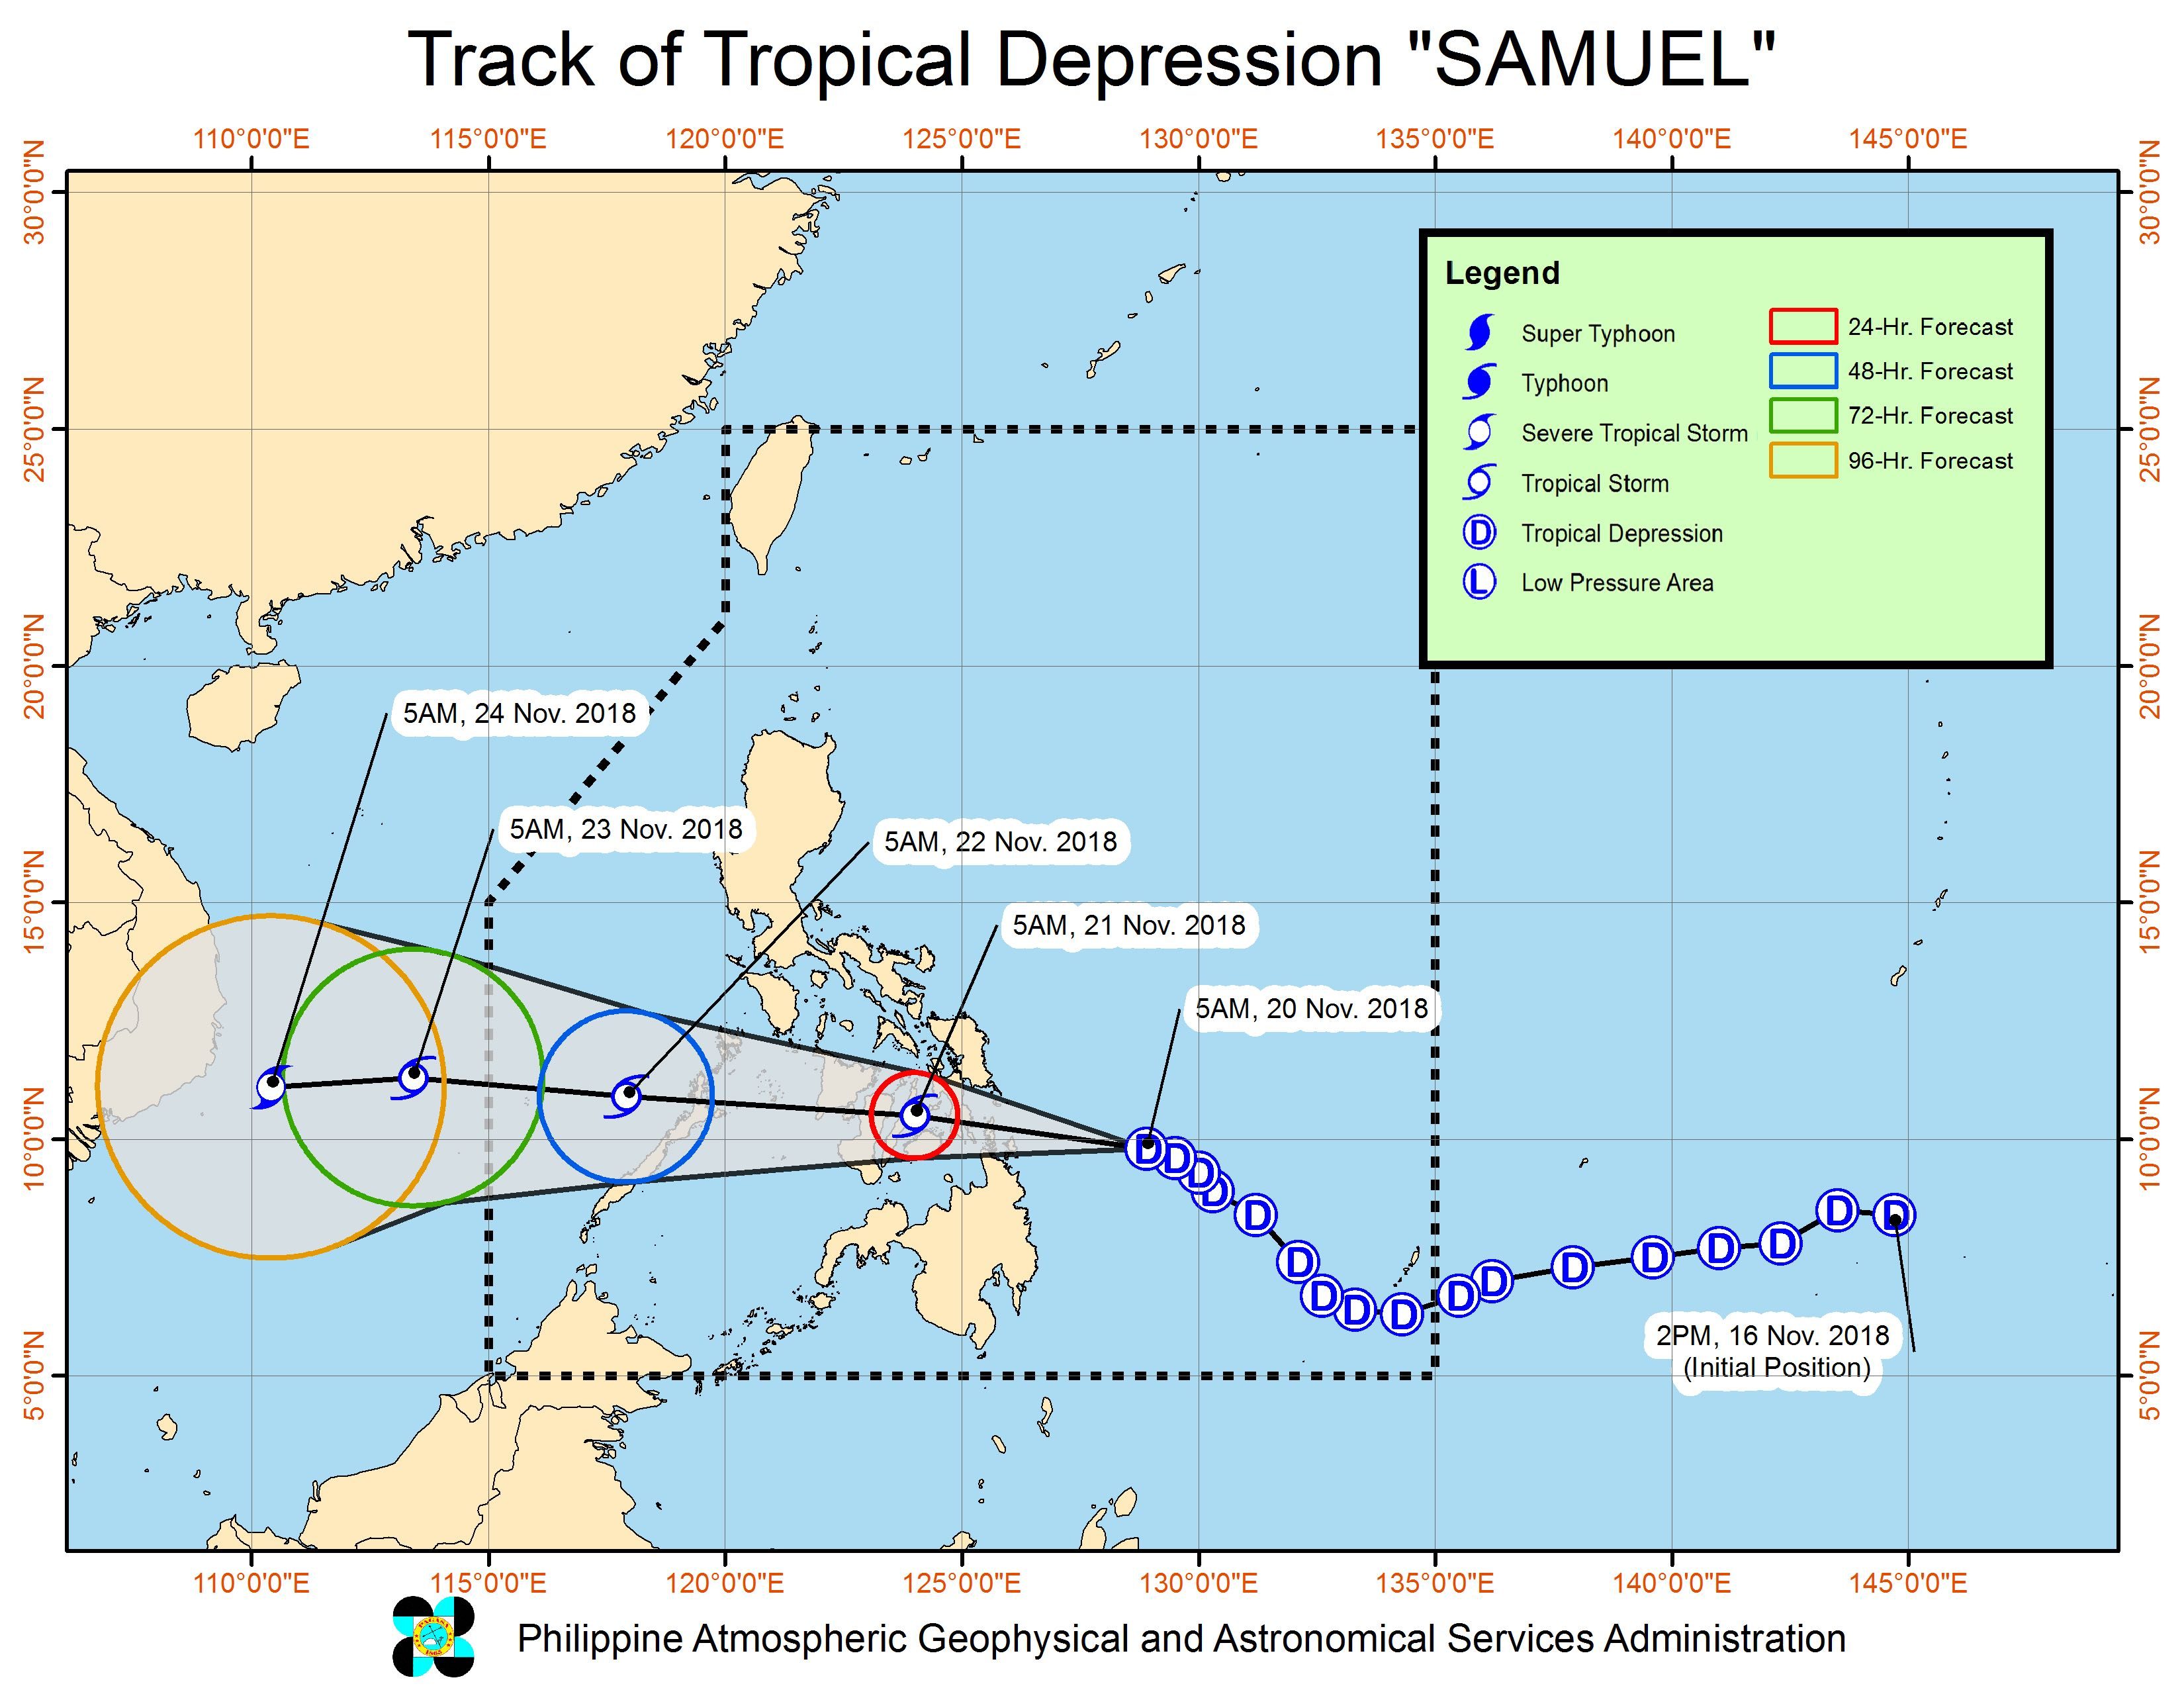 Forecast track of Tropical Depression Samuel as of November 20, 2018, 8 am. Image from PAGASA 